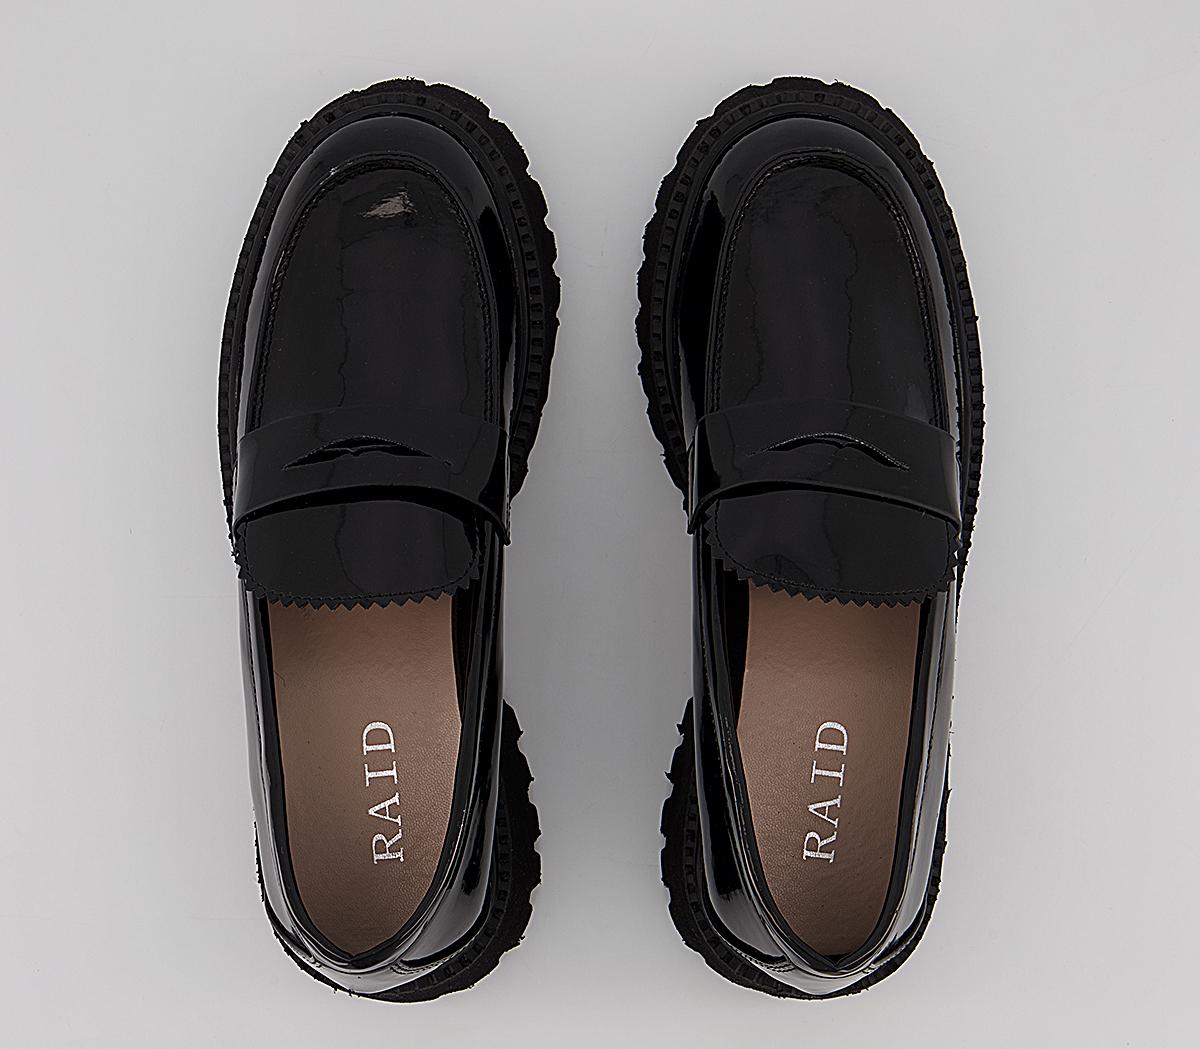 Raid Astra Loafers Black Patent - Flat Shoes for Women